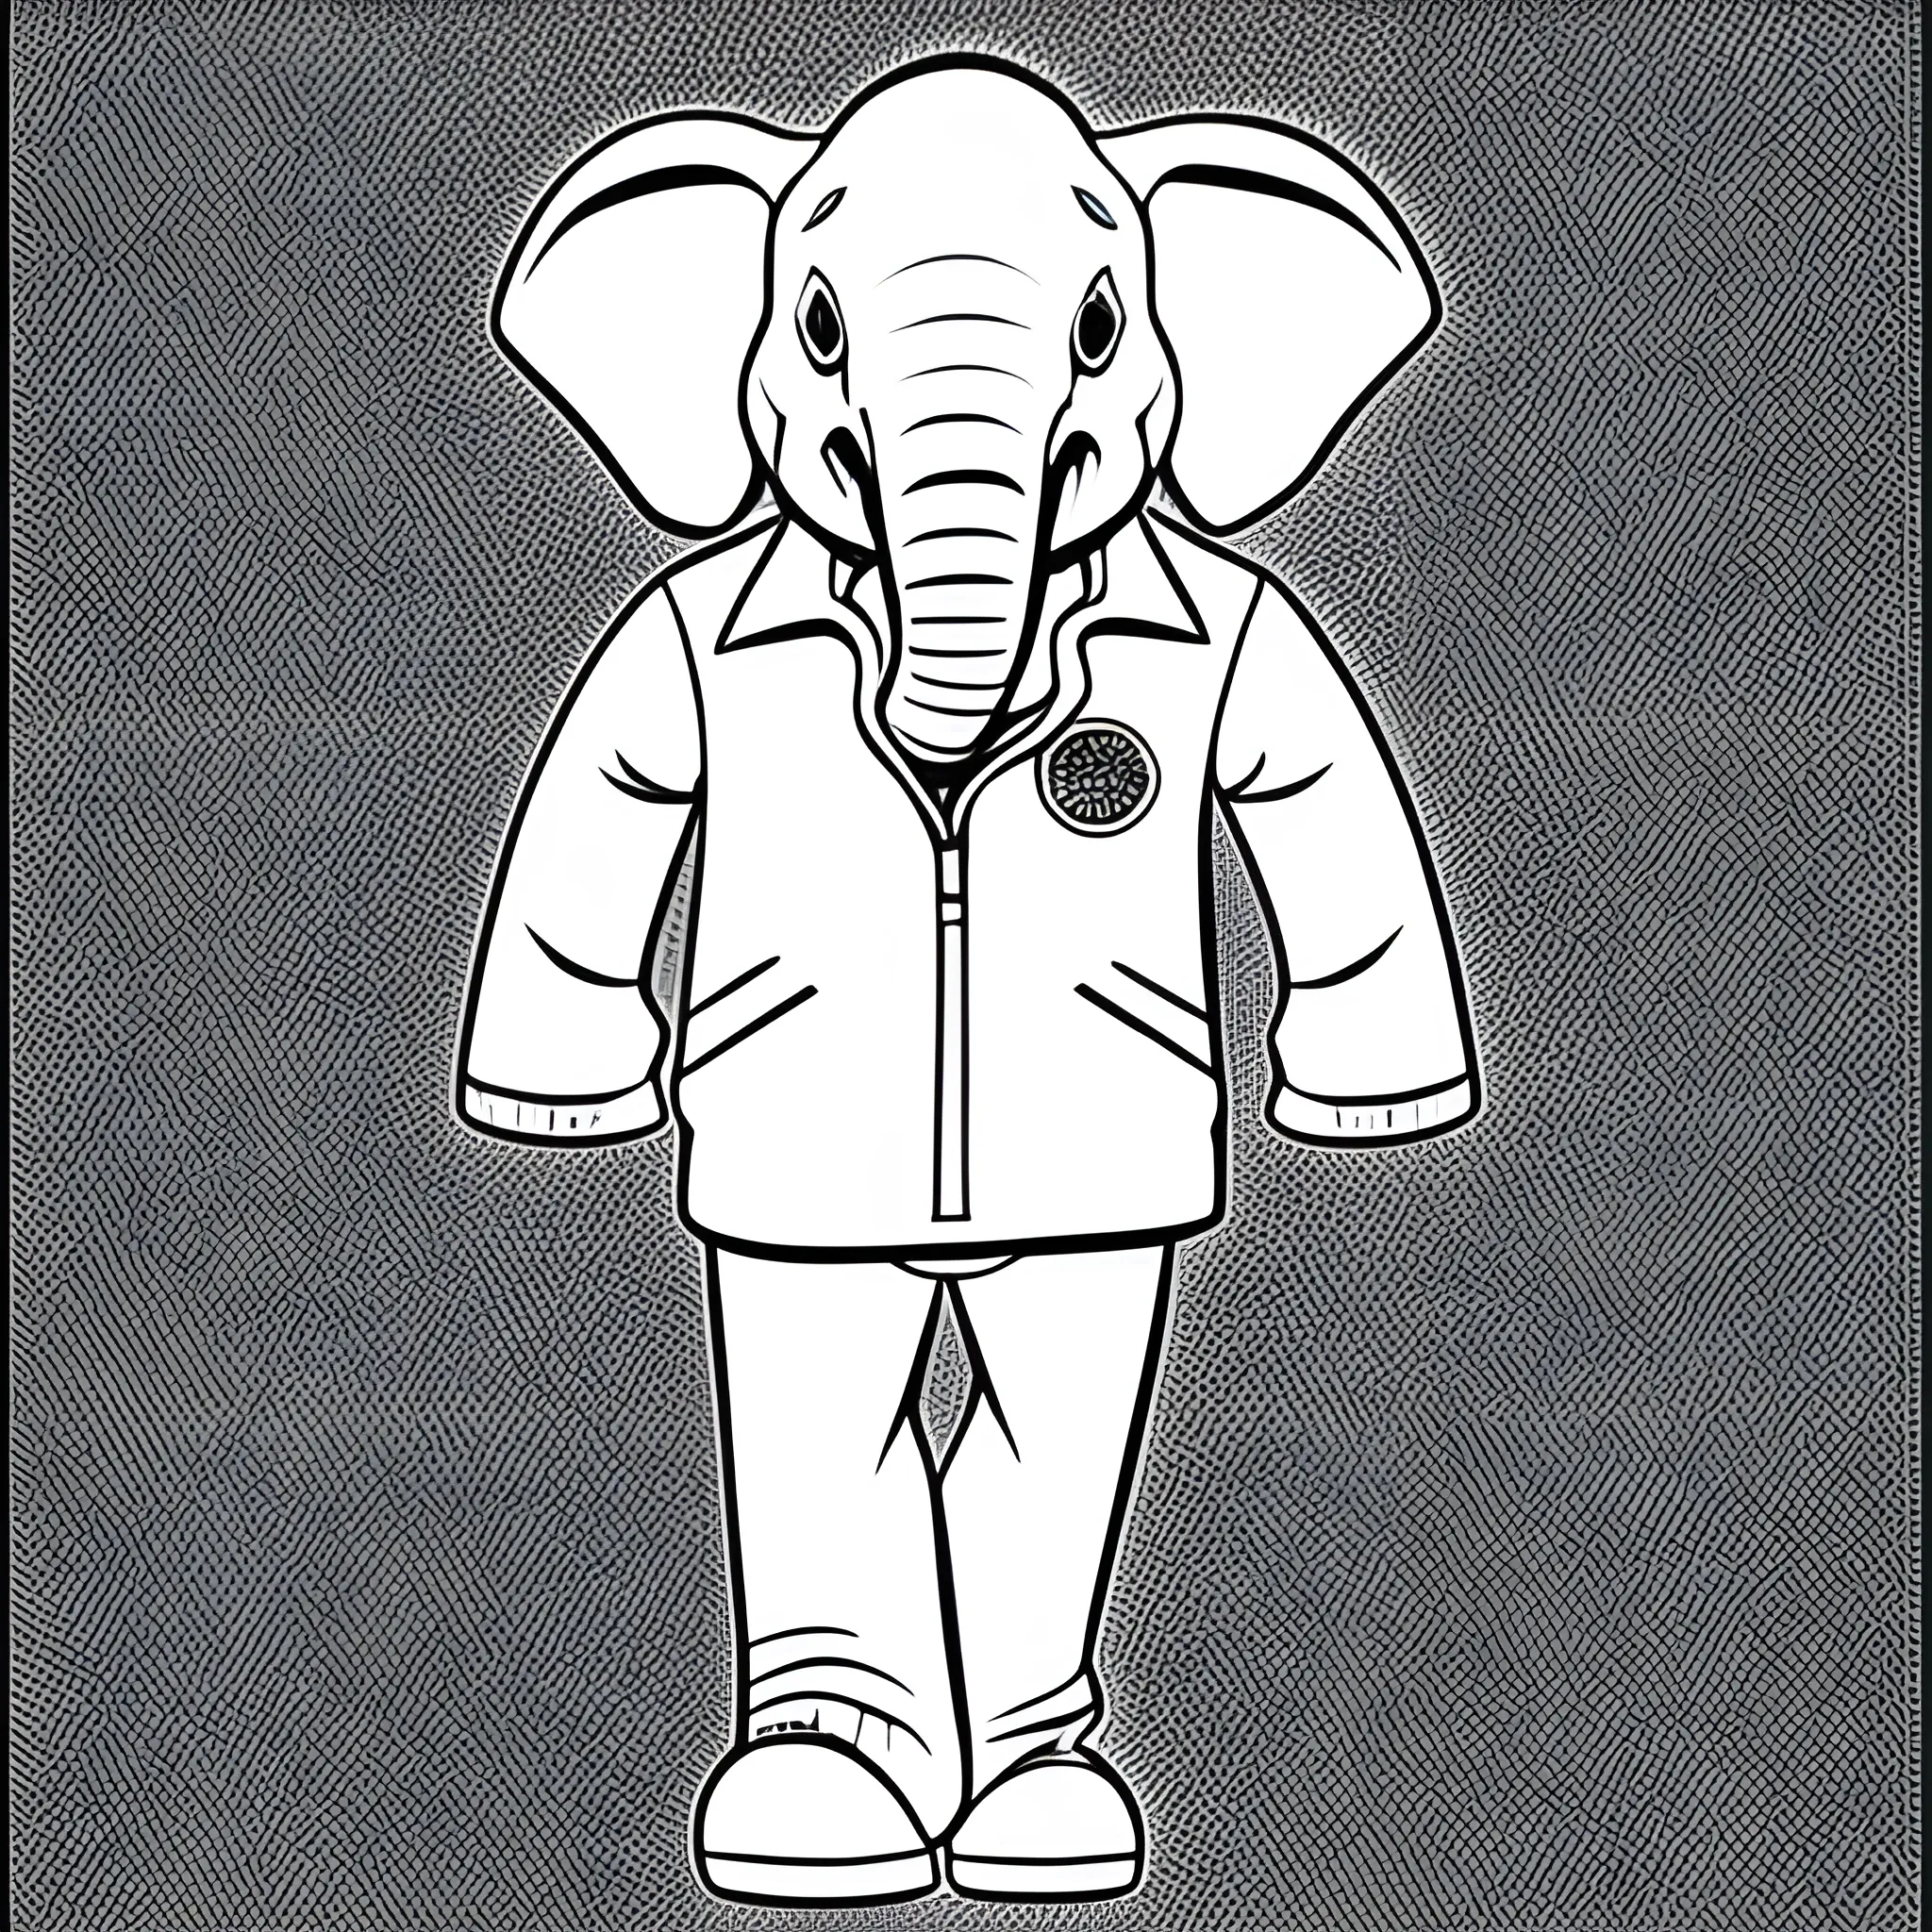 Coloring pages for kids, cartoon funny full body elephant wearing a jacket, white background, No Shading, only black and white colors